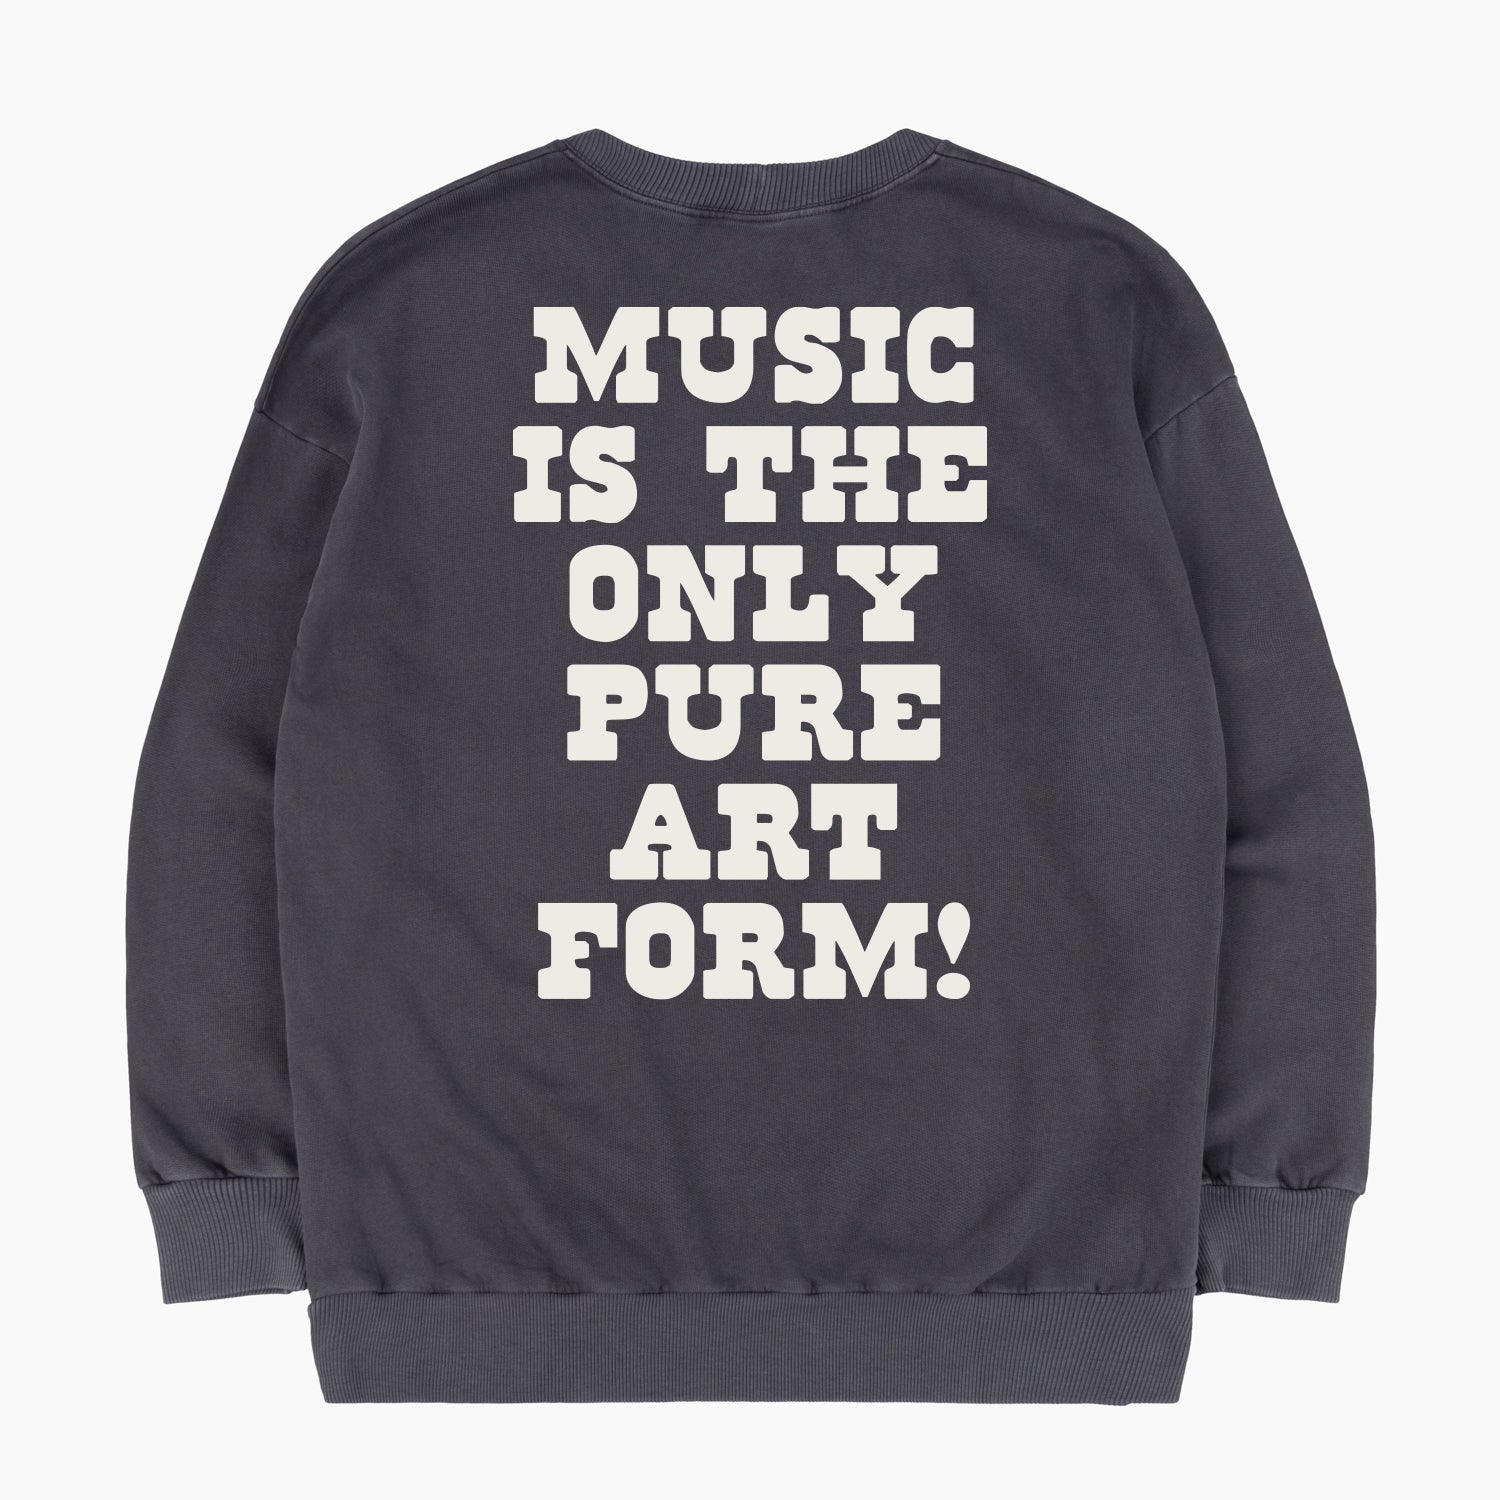 Music Is The Only Pure Art Form 60s Sweatshirt